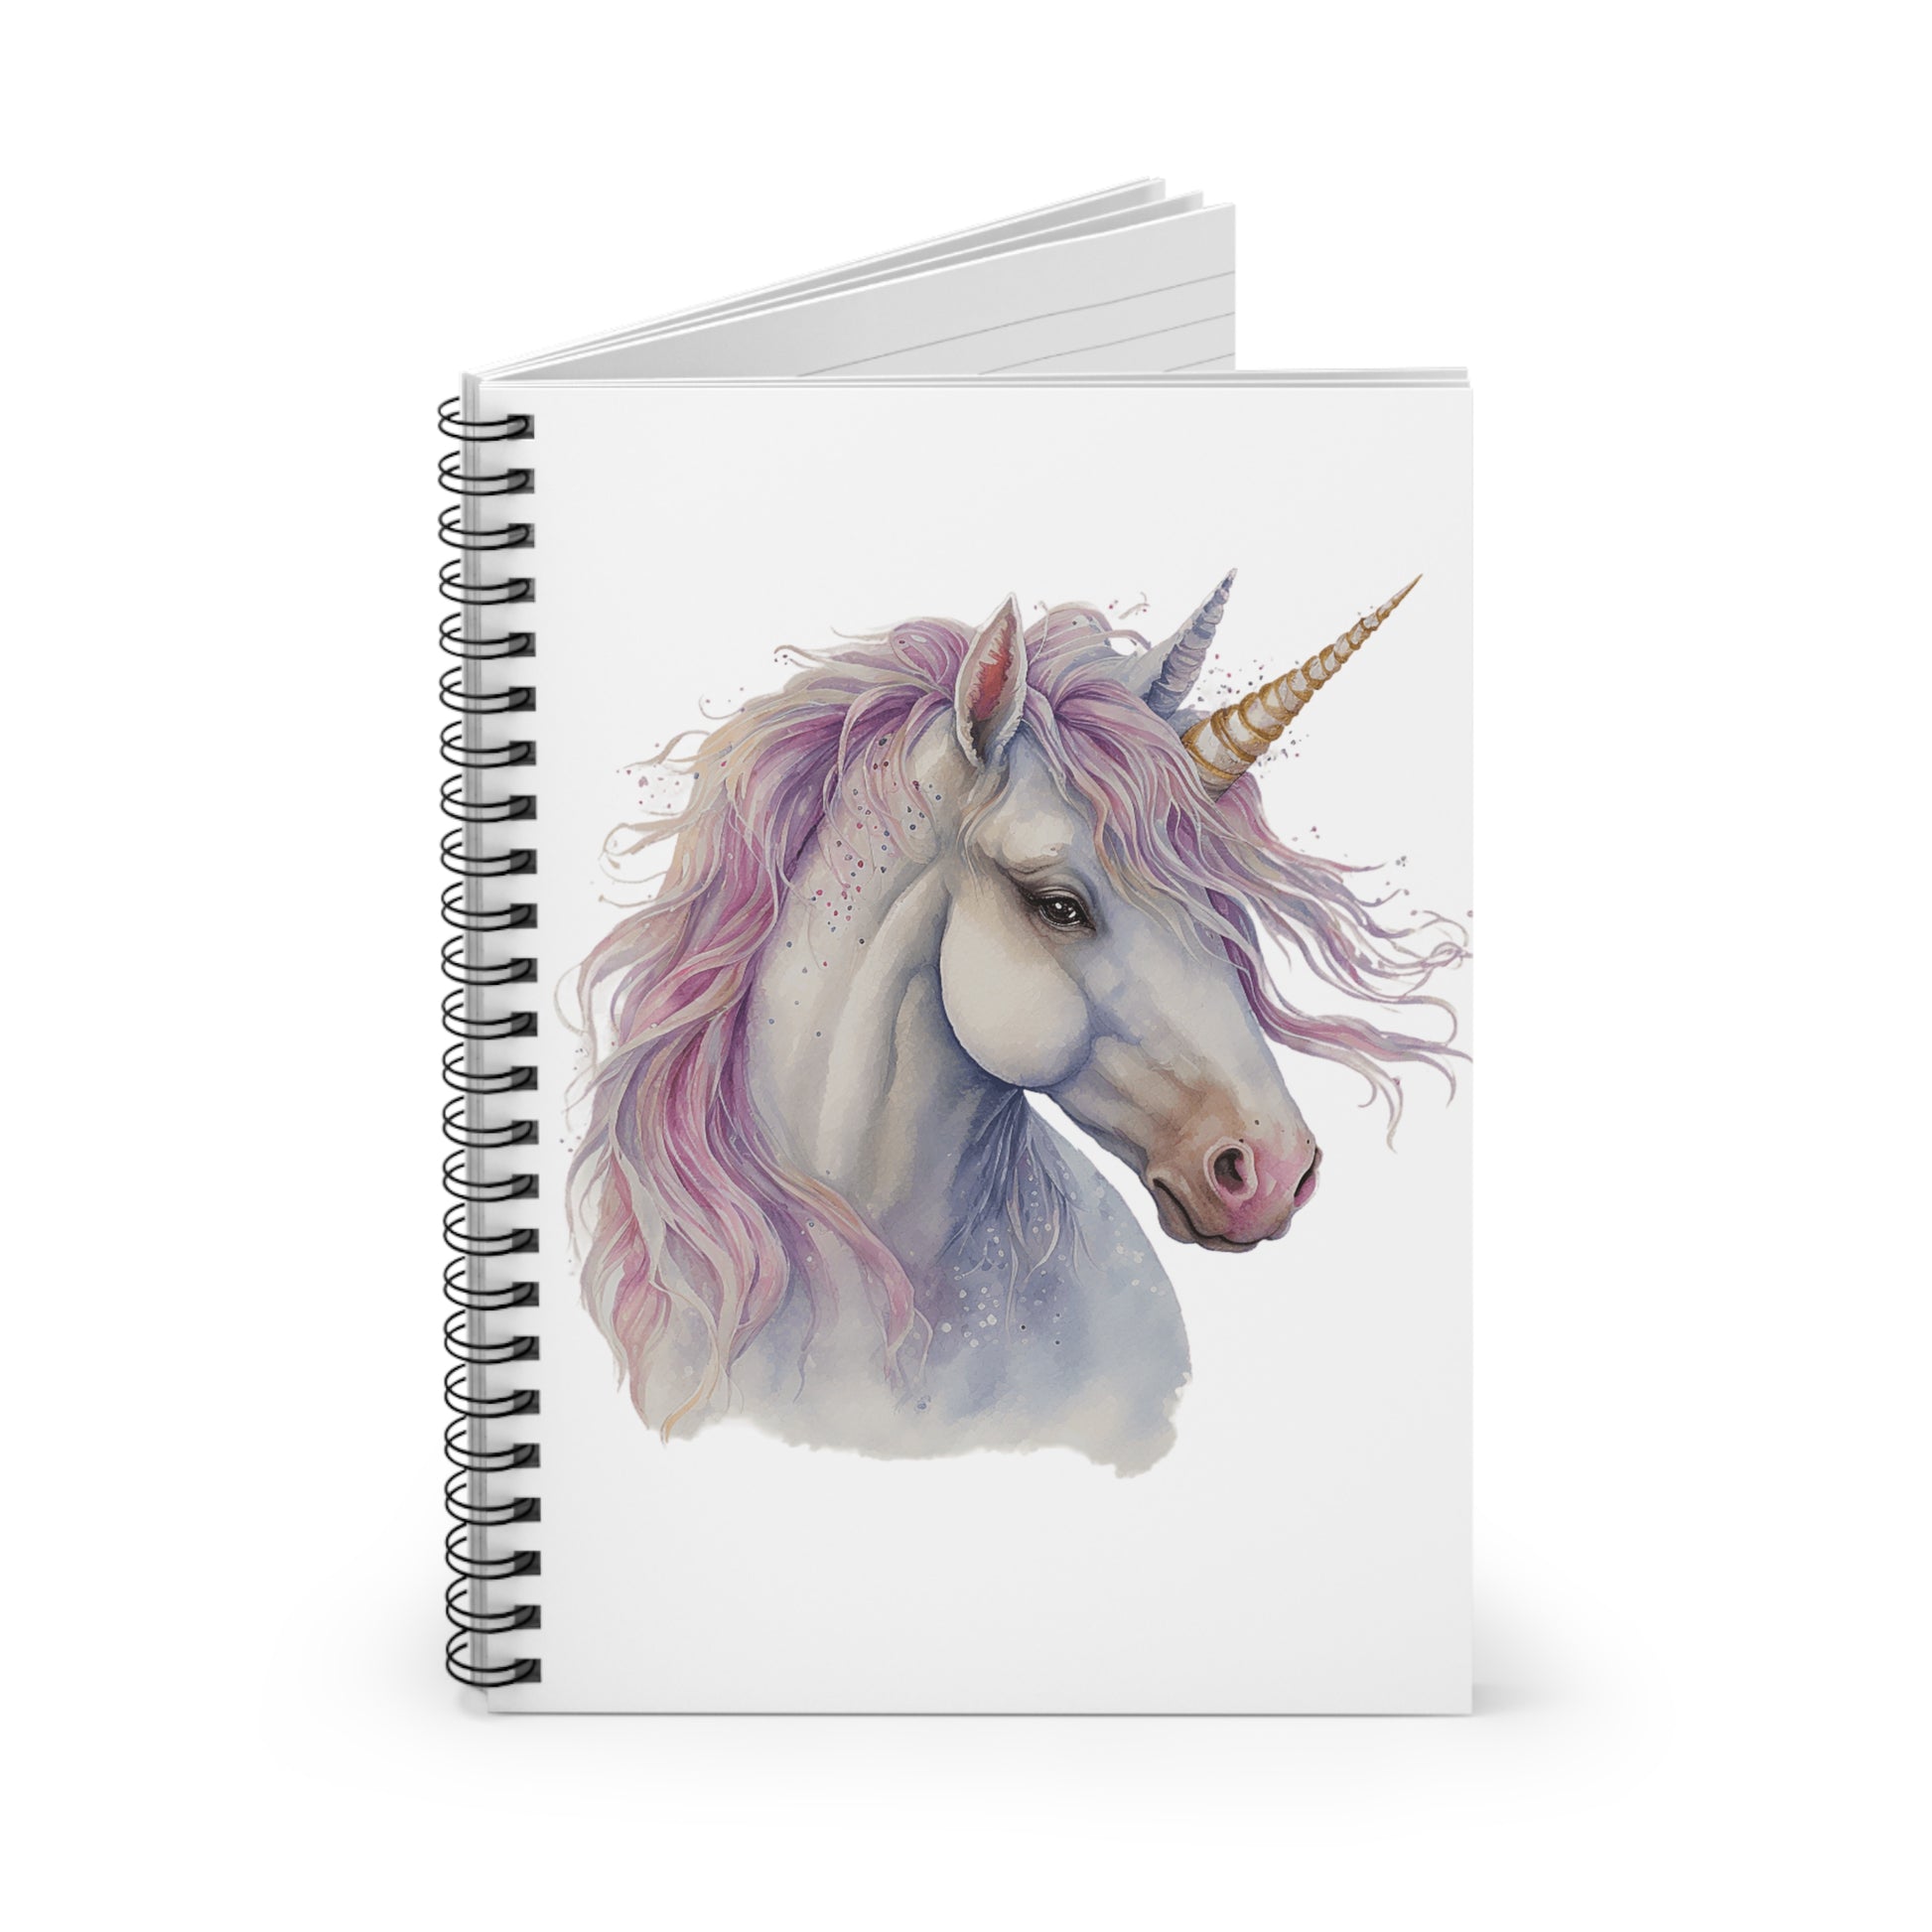 Mythical Unicorn: Spiral Notebook - Log Books - Journals - Diaries - and More Custom Printed by TheGlassyLass.com